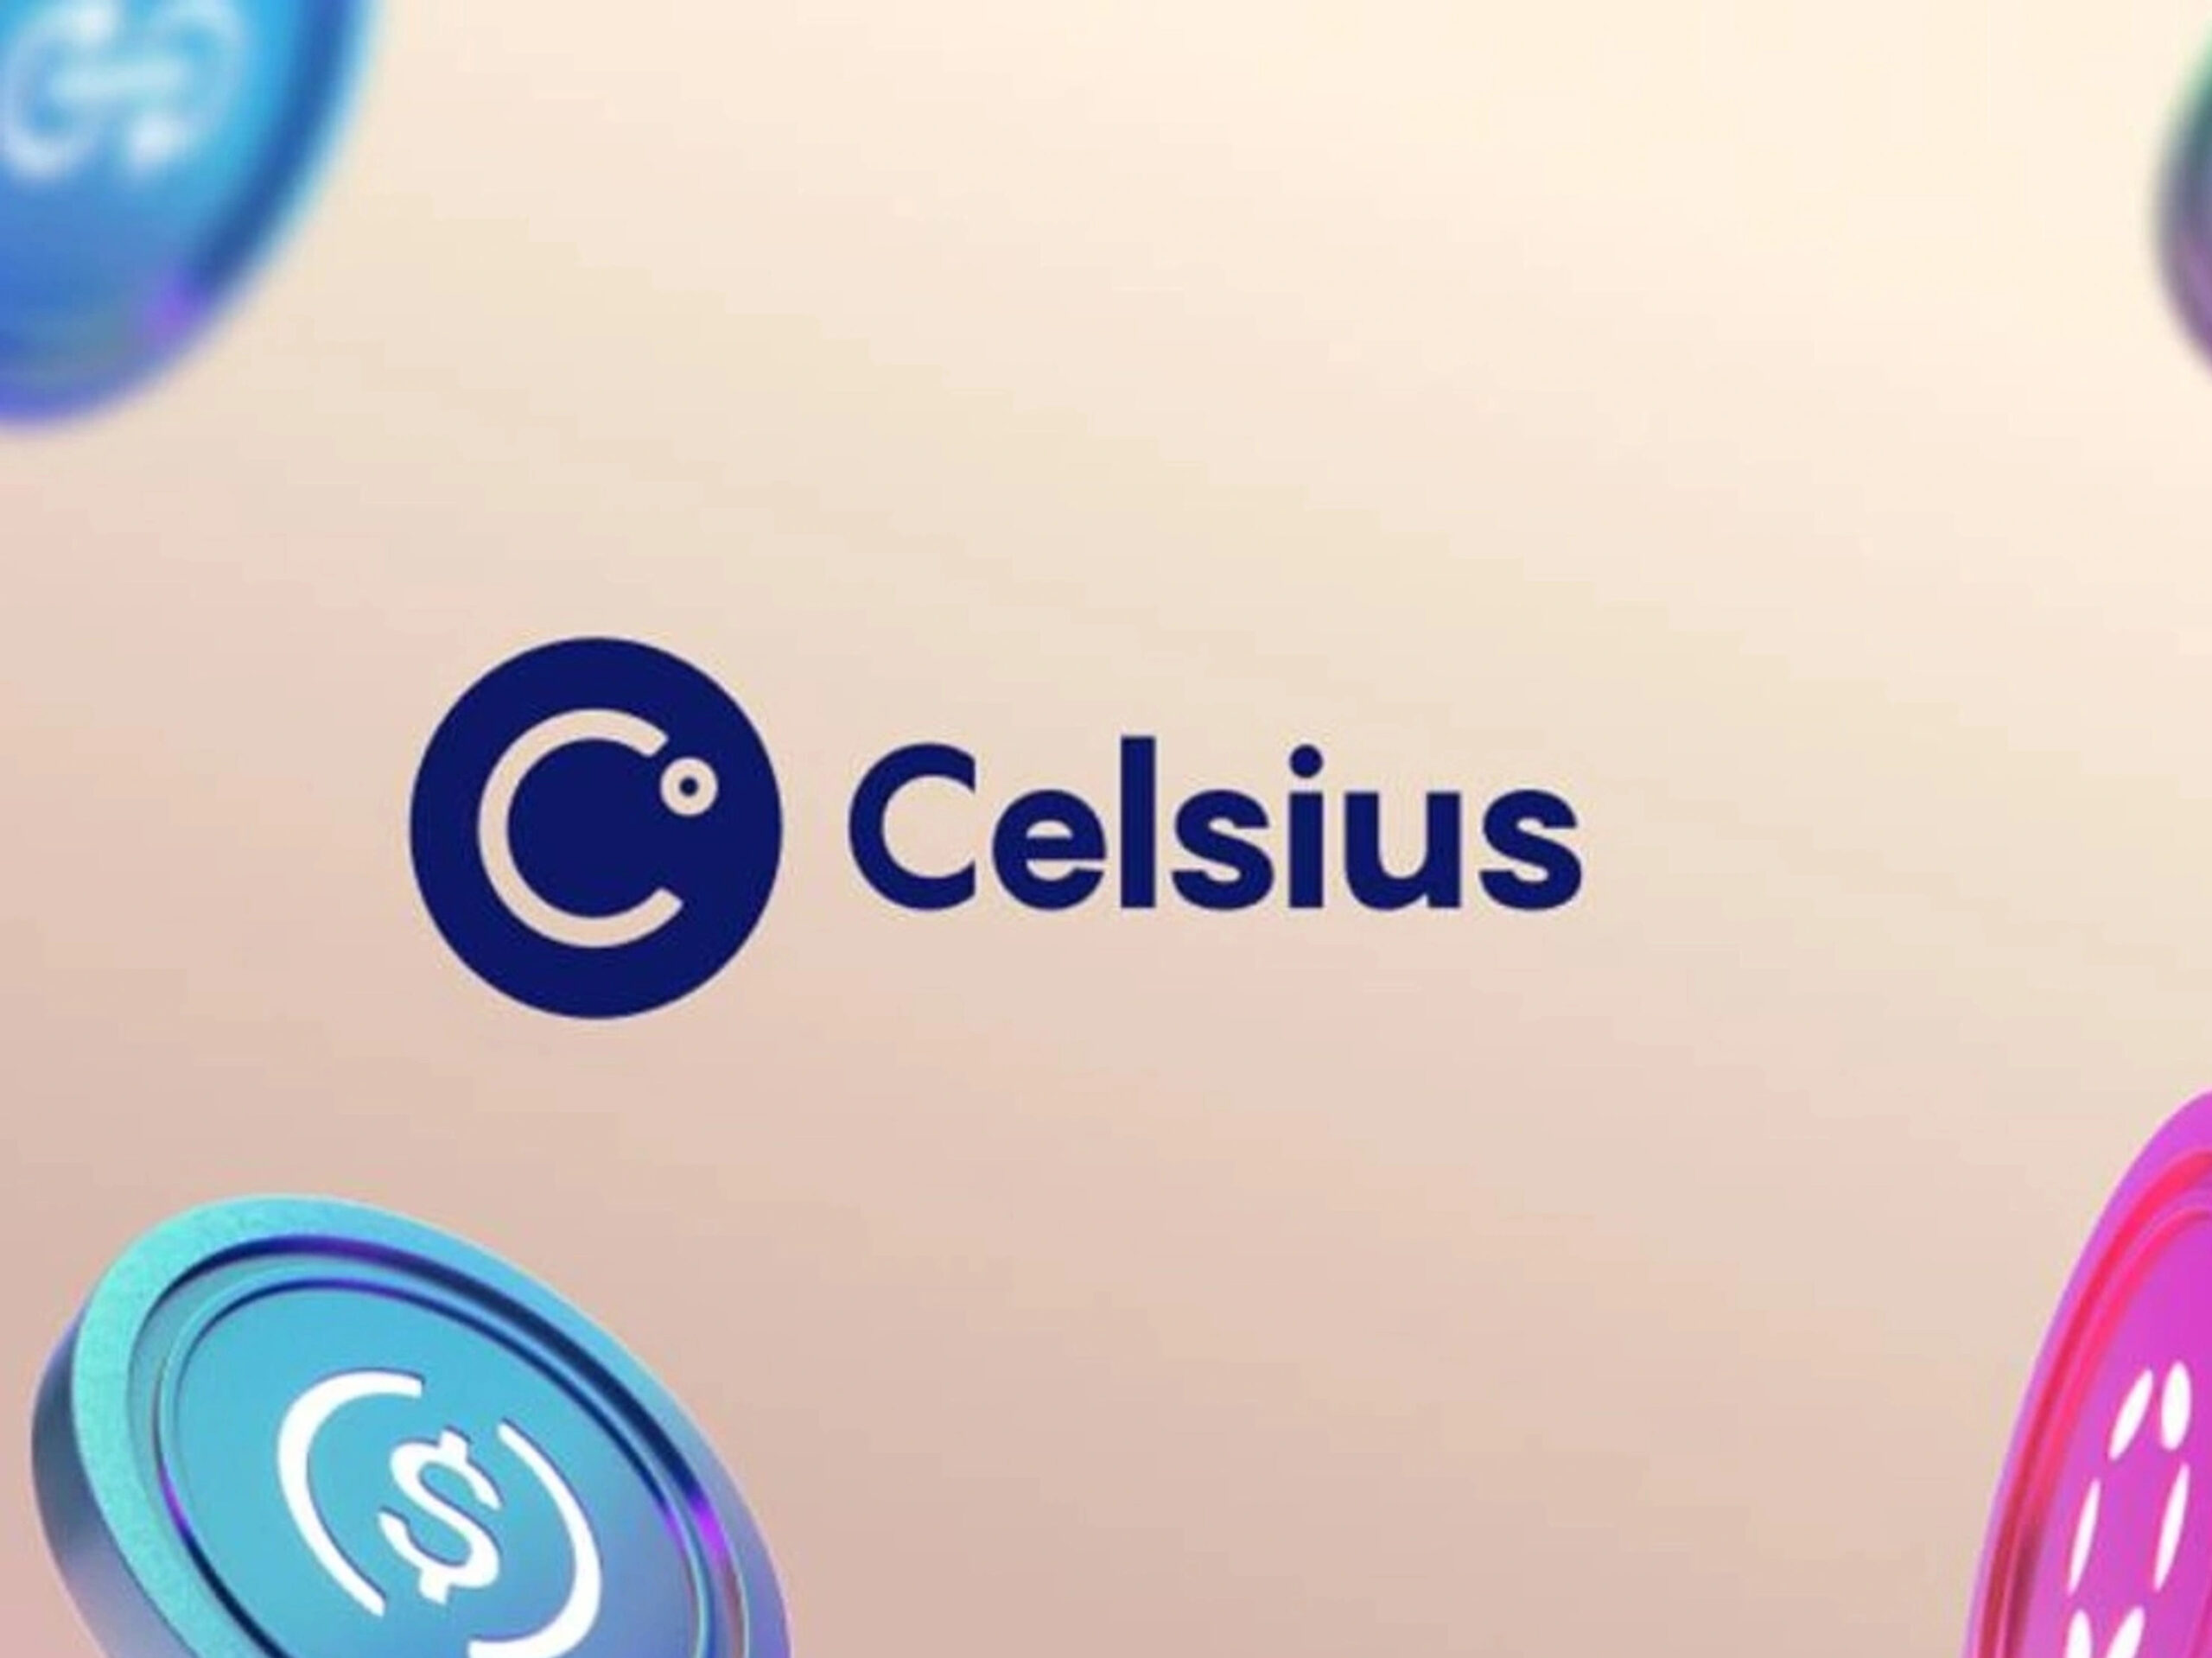 Celsius Network Emerges from Bankruptcy, To Distribute $3 Billion in Crypto to Creditors and Establish New Bitcoin Mining Company